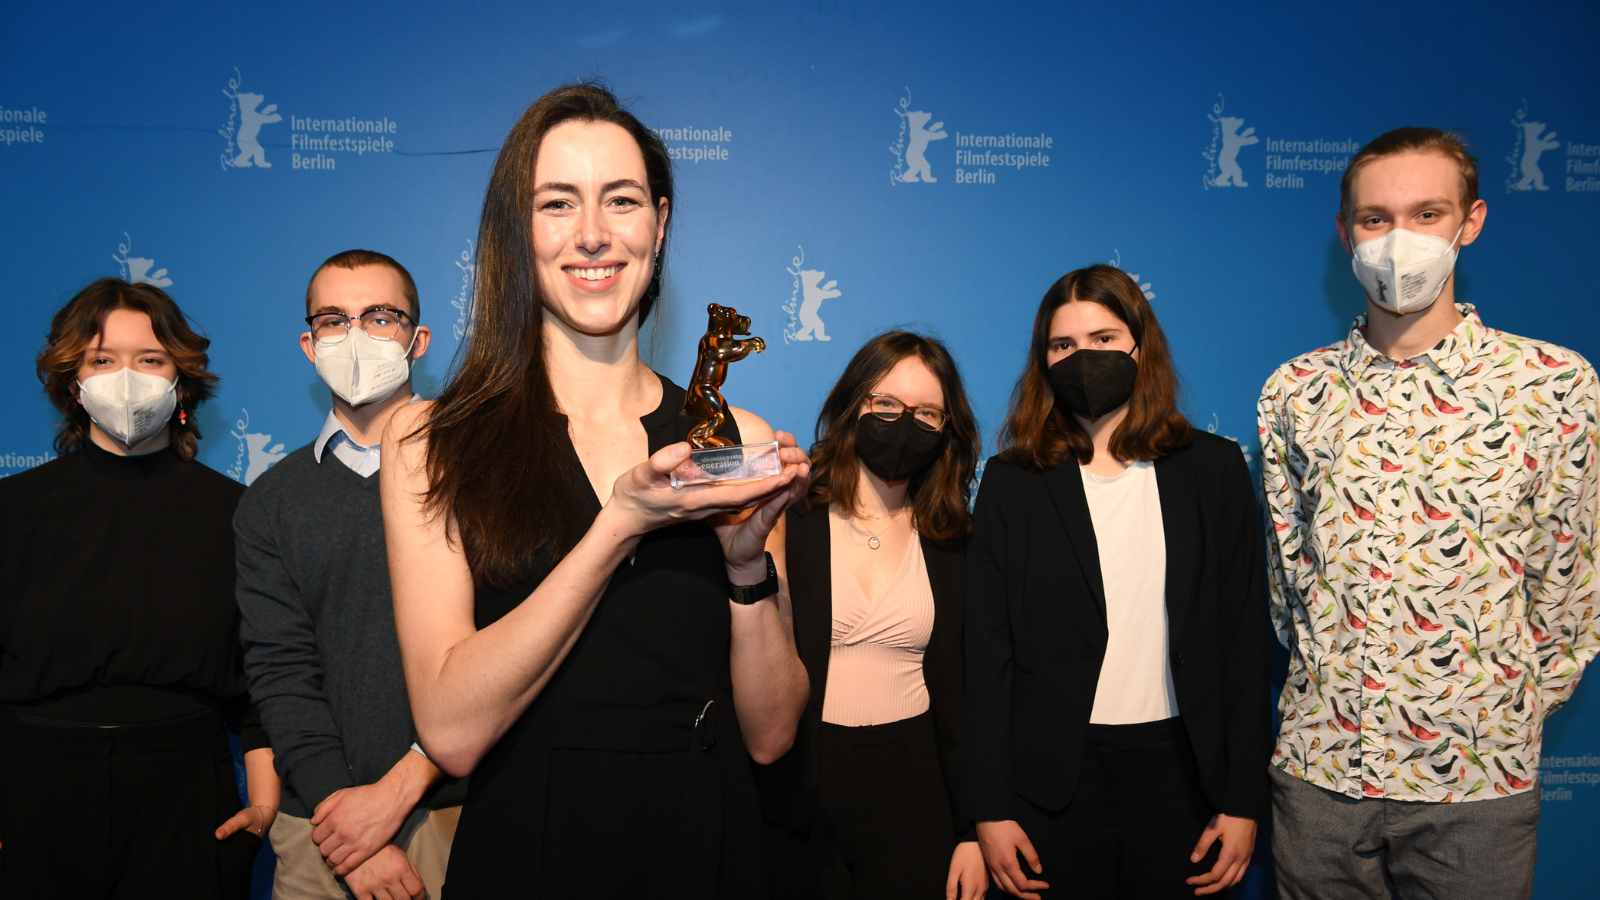 A woman in a black outfit holds an award up, smiling. She is film maker Charlotte Hailstone. Behind her are five people wearing face masks. They are pictured together on a red carpet in front of a bright blue wall, after an awards ceremony.